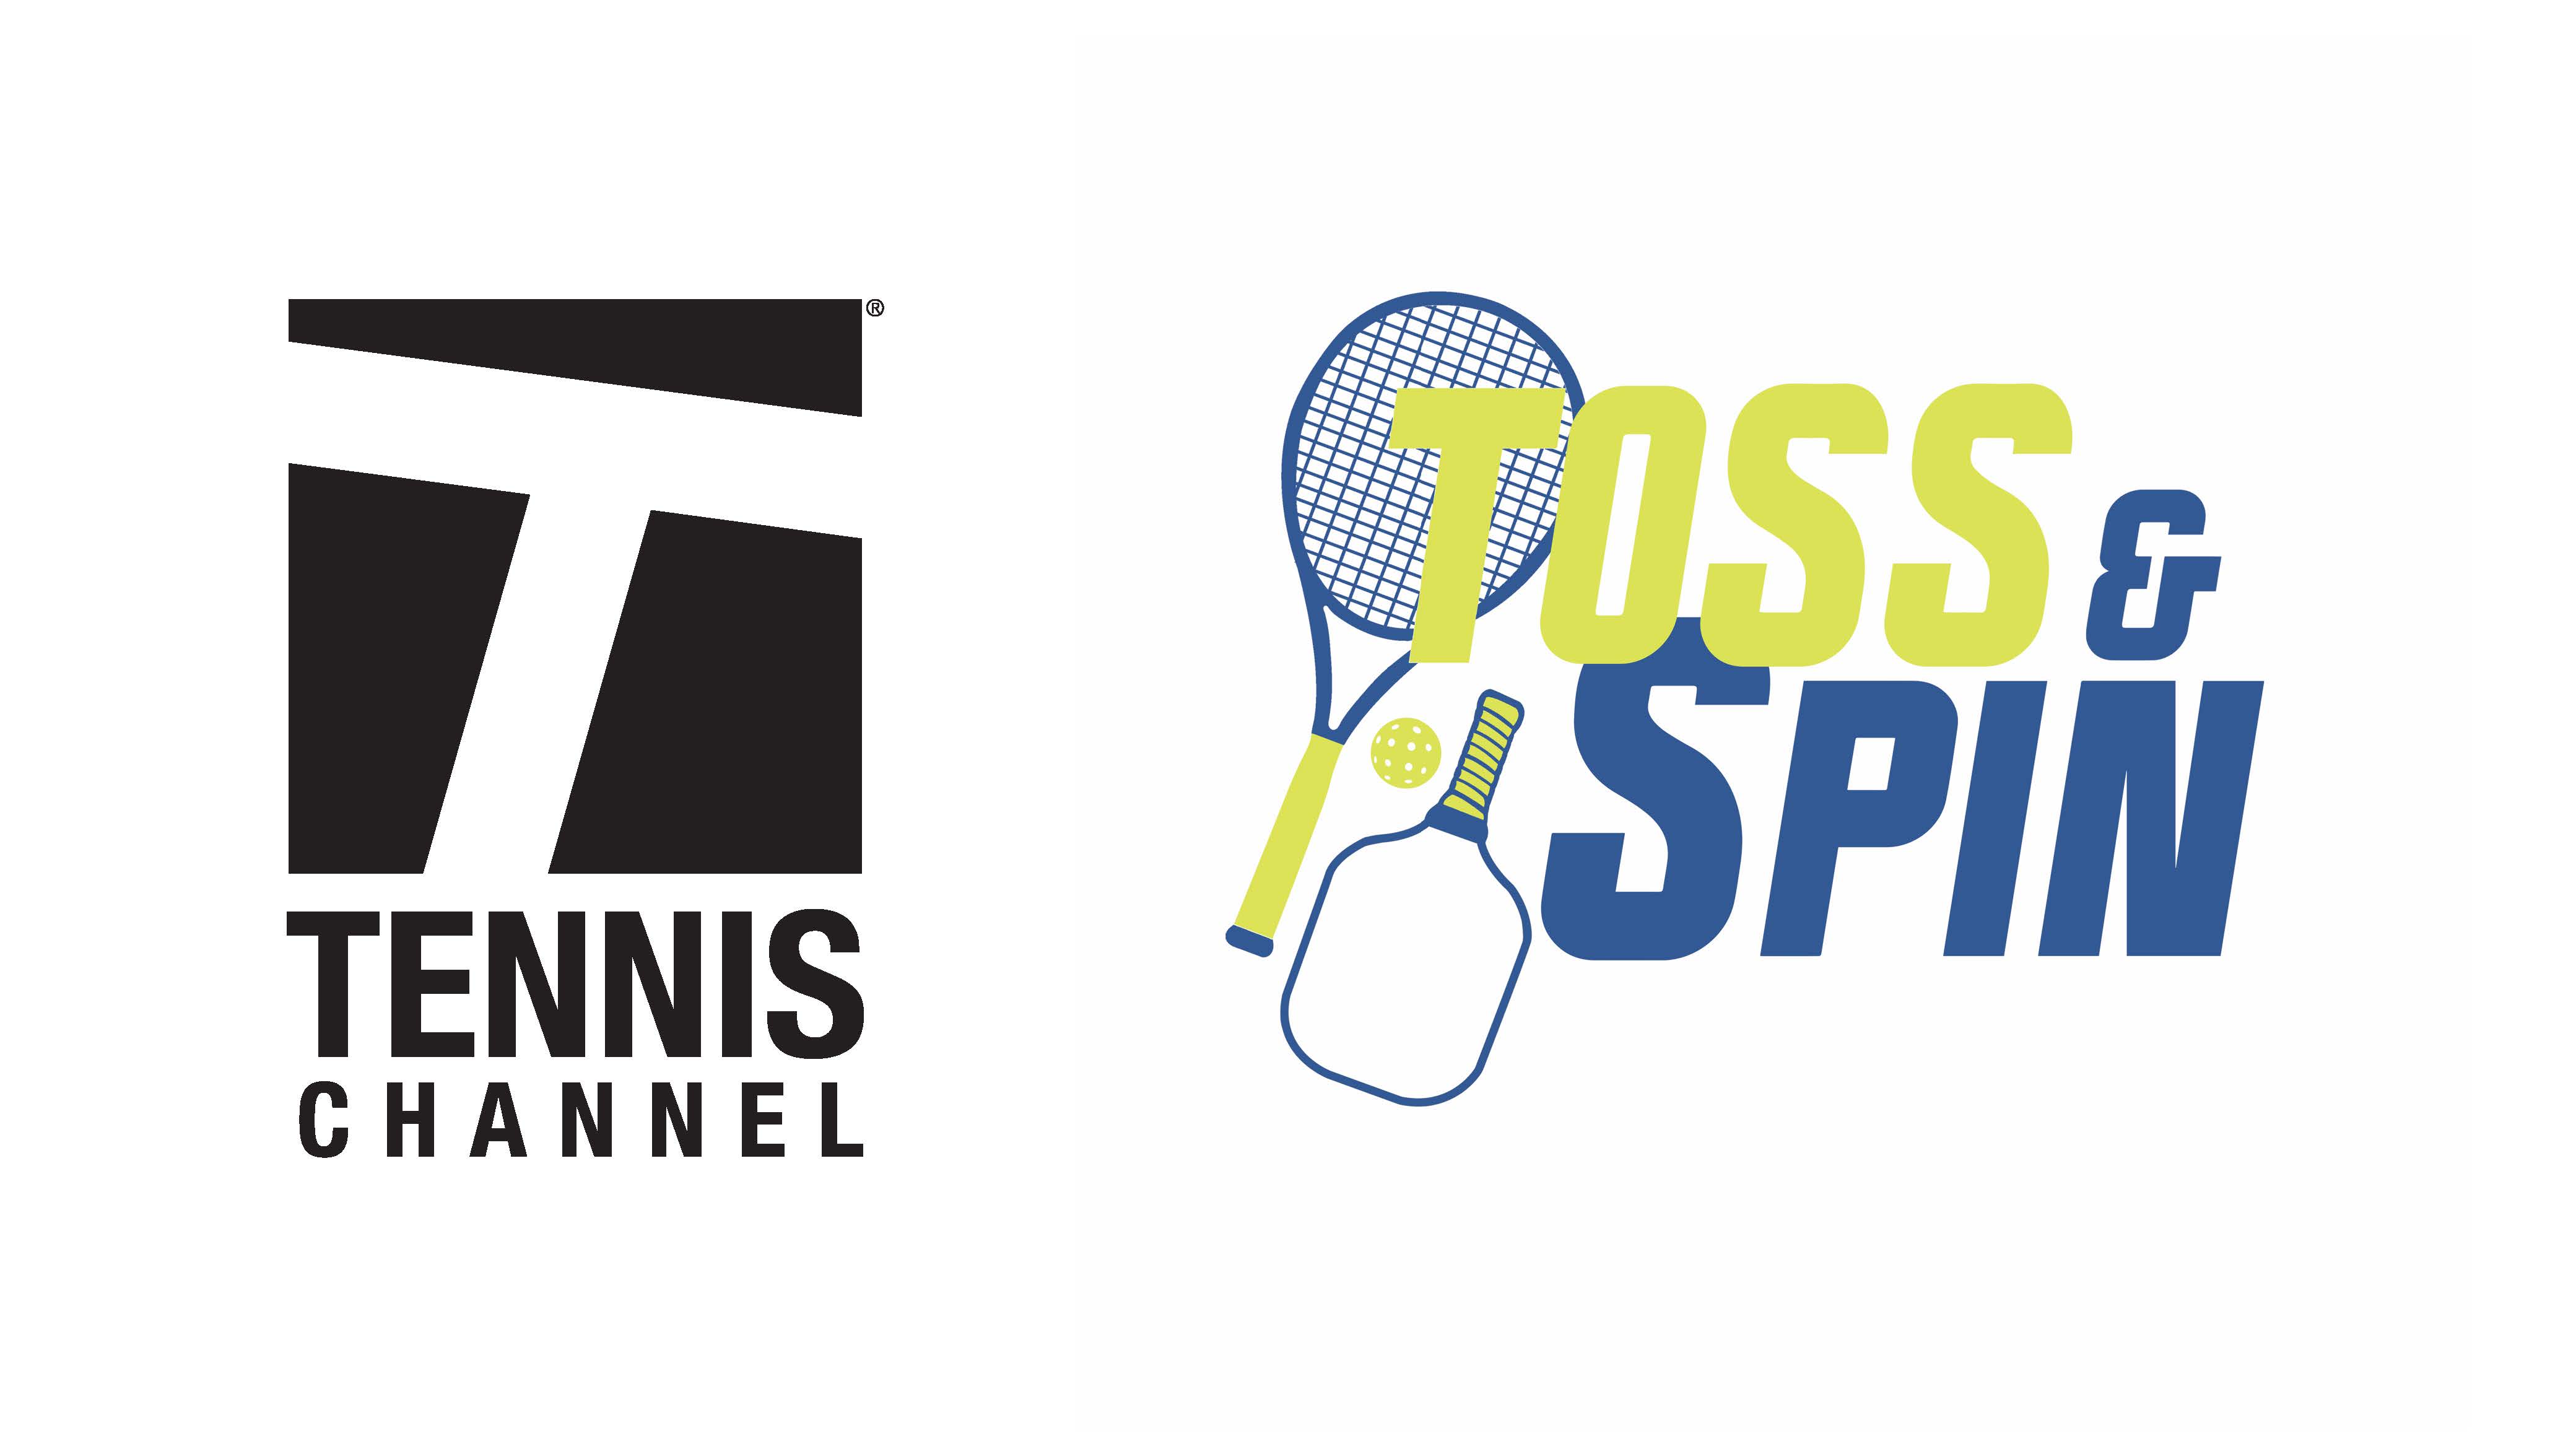 Tennis Channel and Toss and Spin 